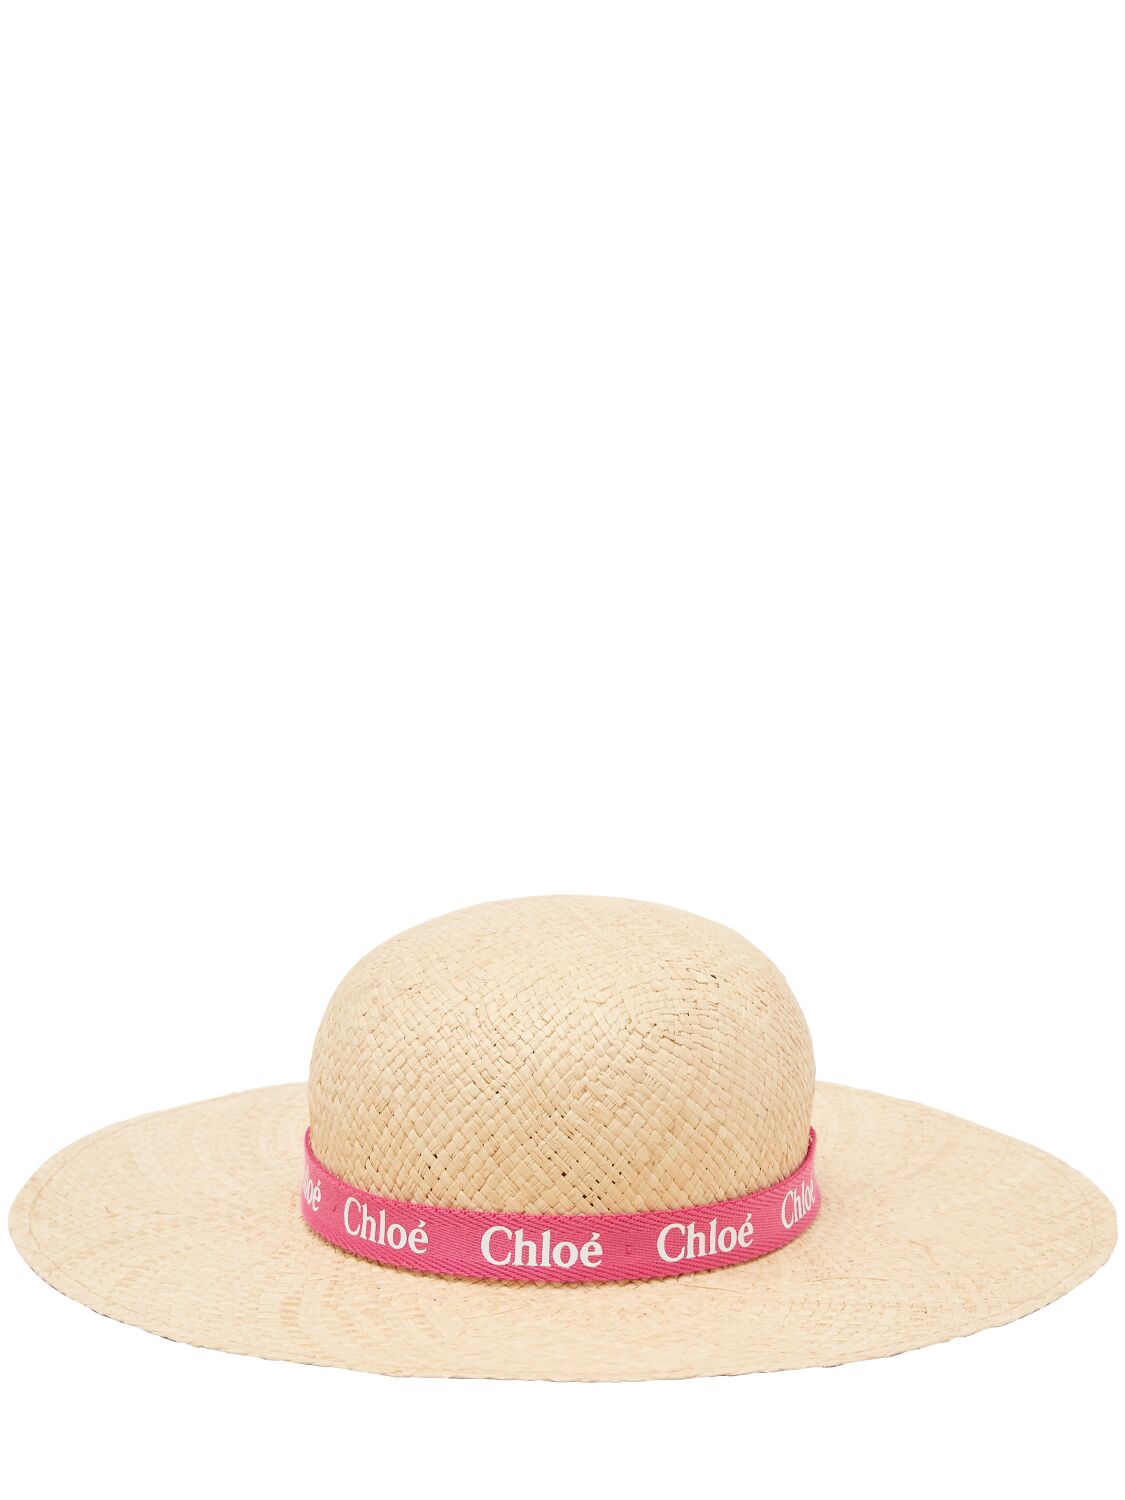 Image of Woven Hat